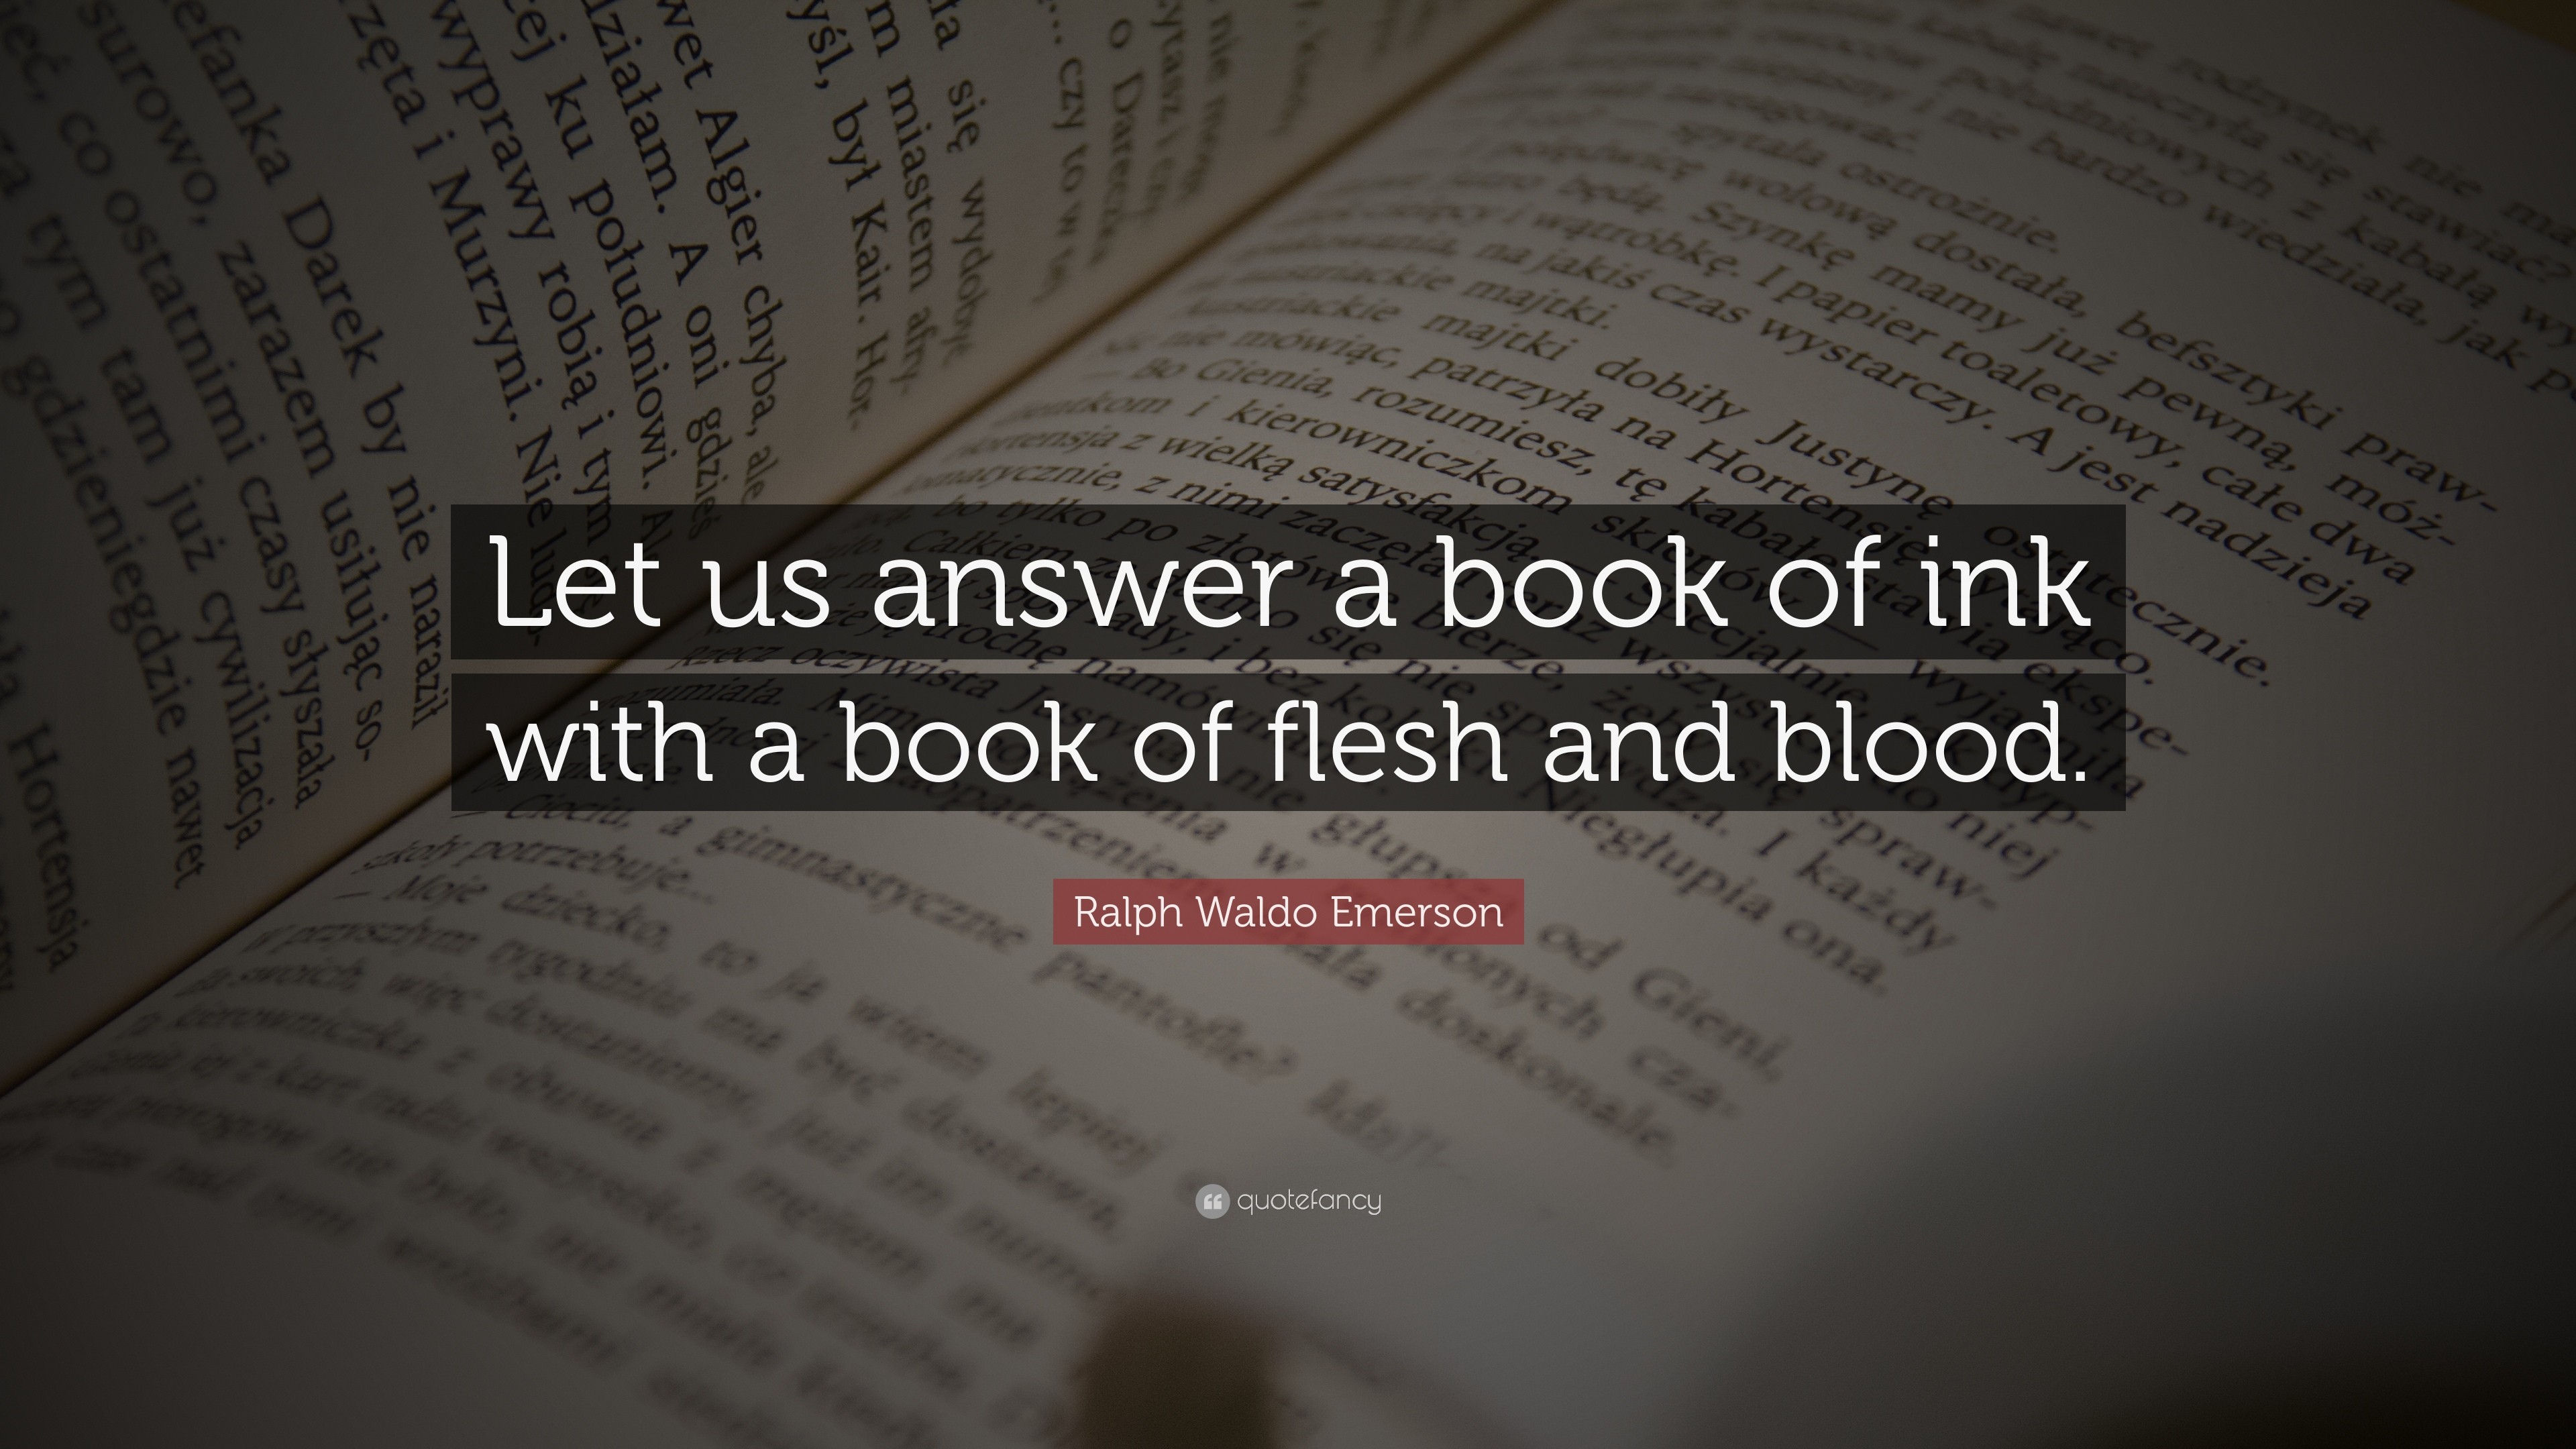 3840x2160 Ralph Waldo Emerson Quote: “Let us answer a book of ink with a book